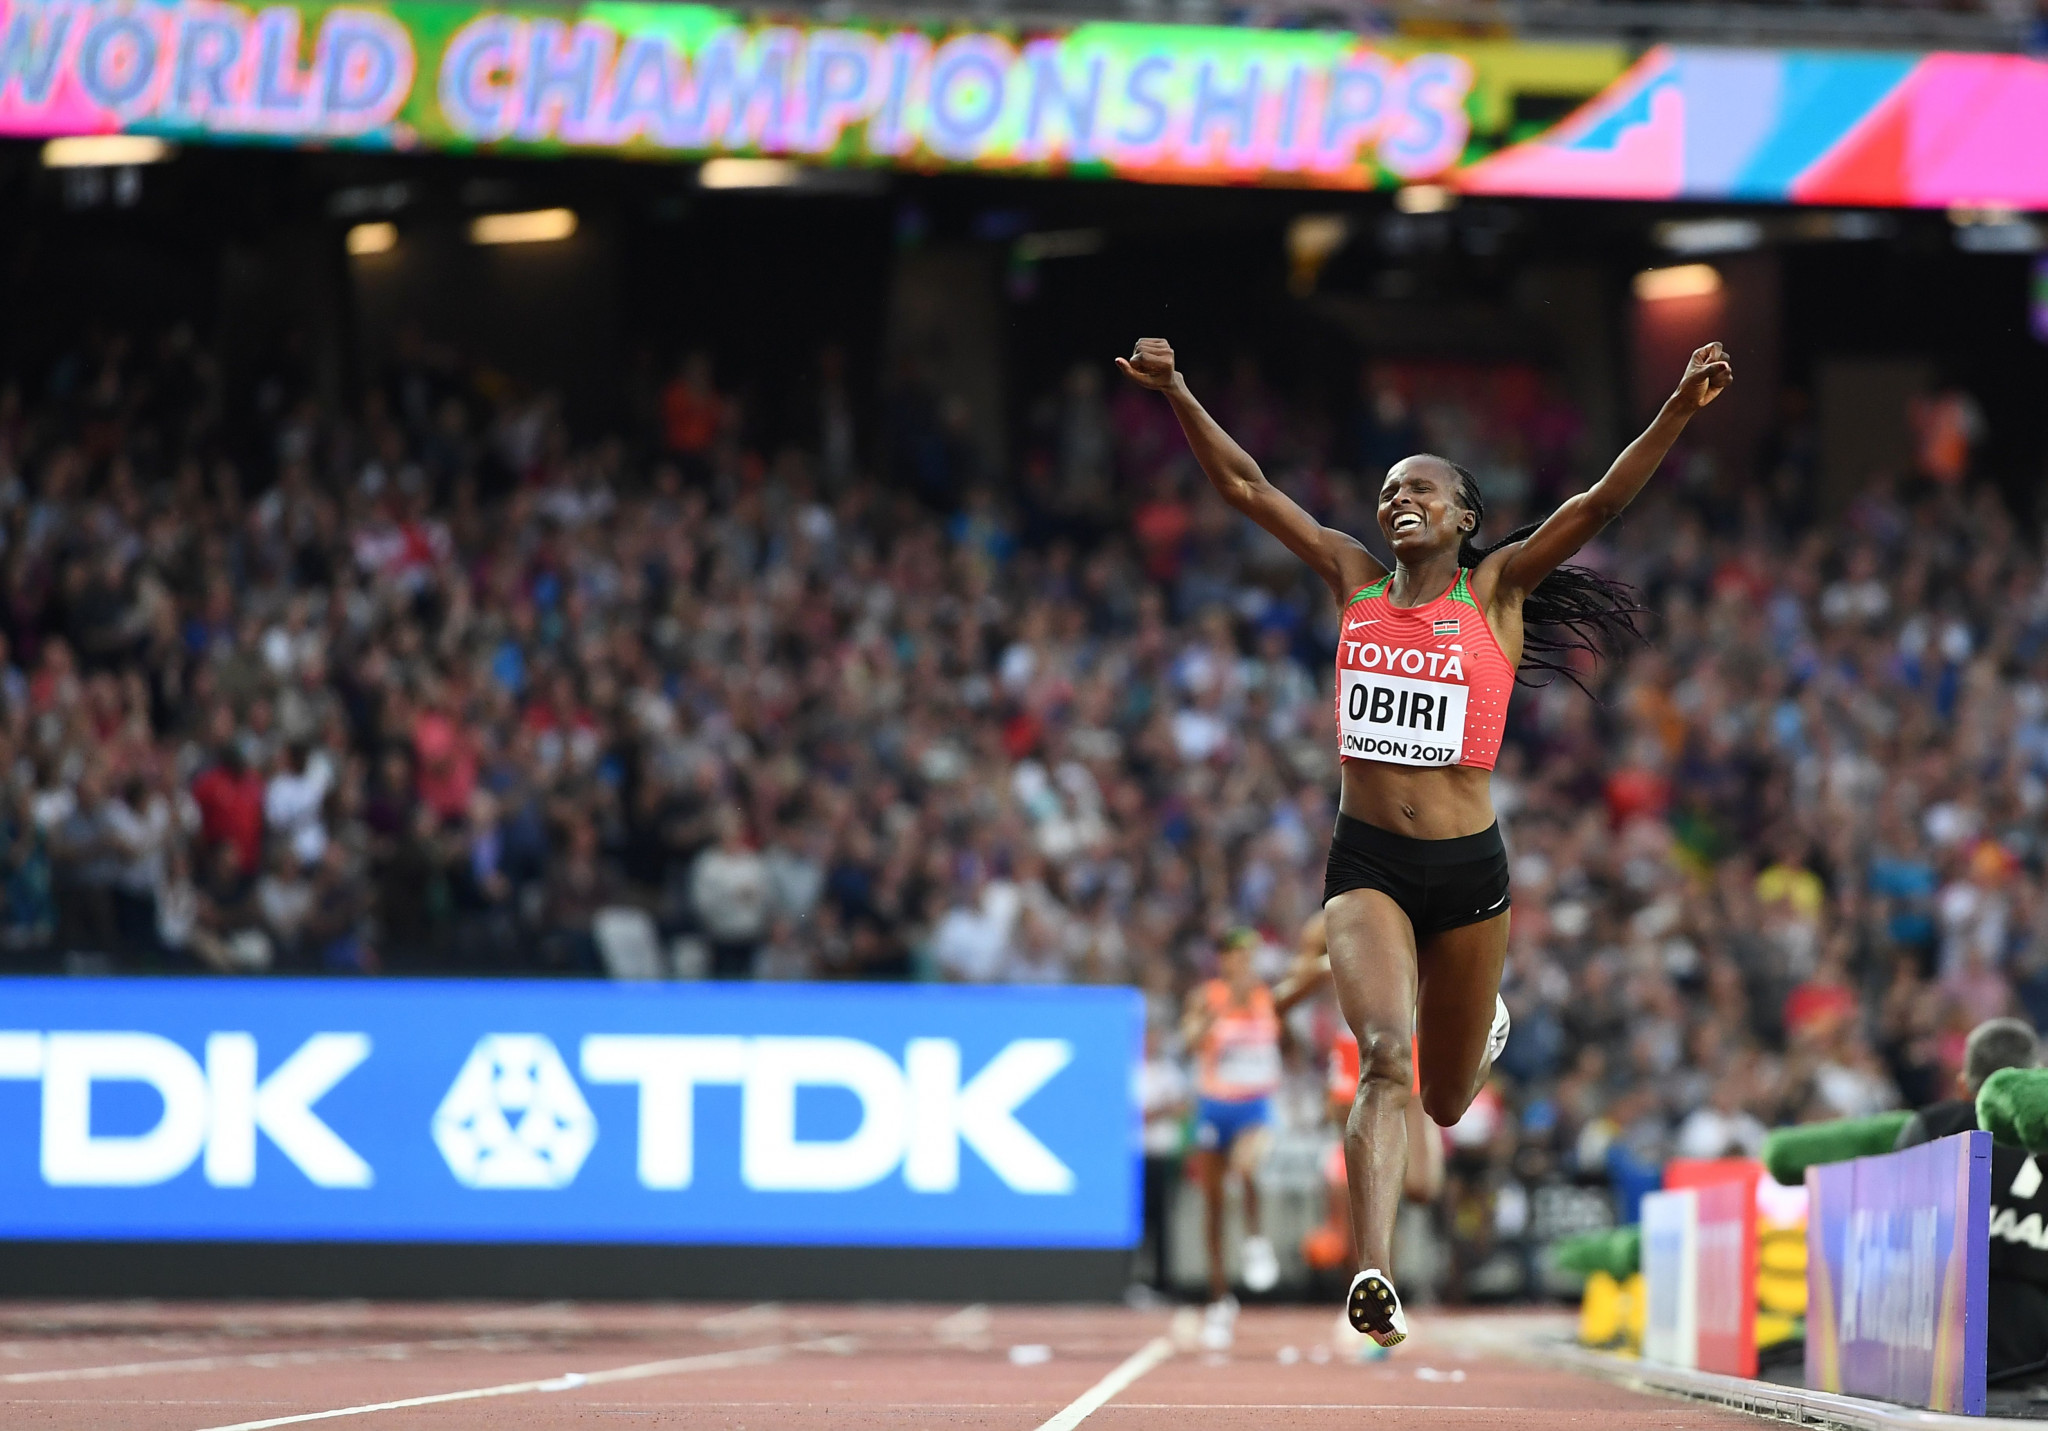 Hellen Obiri won her first outdoor global crown in 2017 by securing victory in the 5,000 metres final at the IAAF World Championships in London ©Getty Images